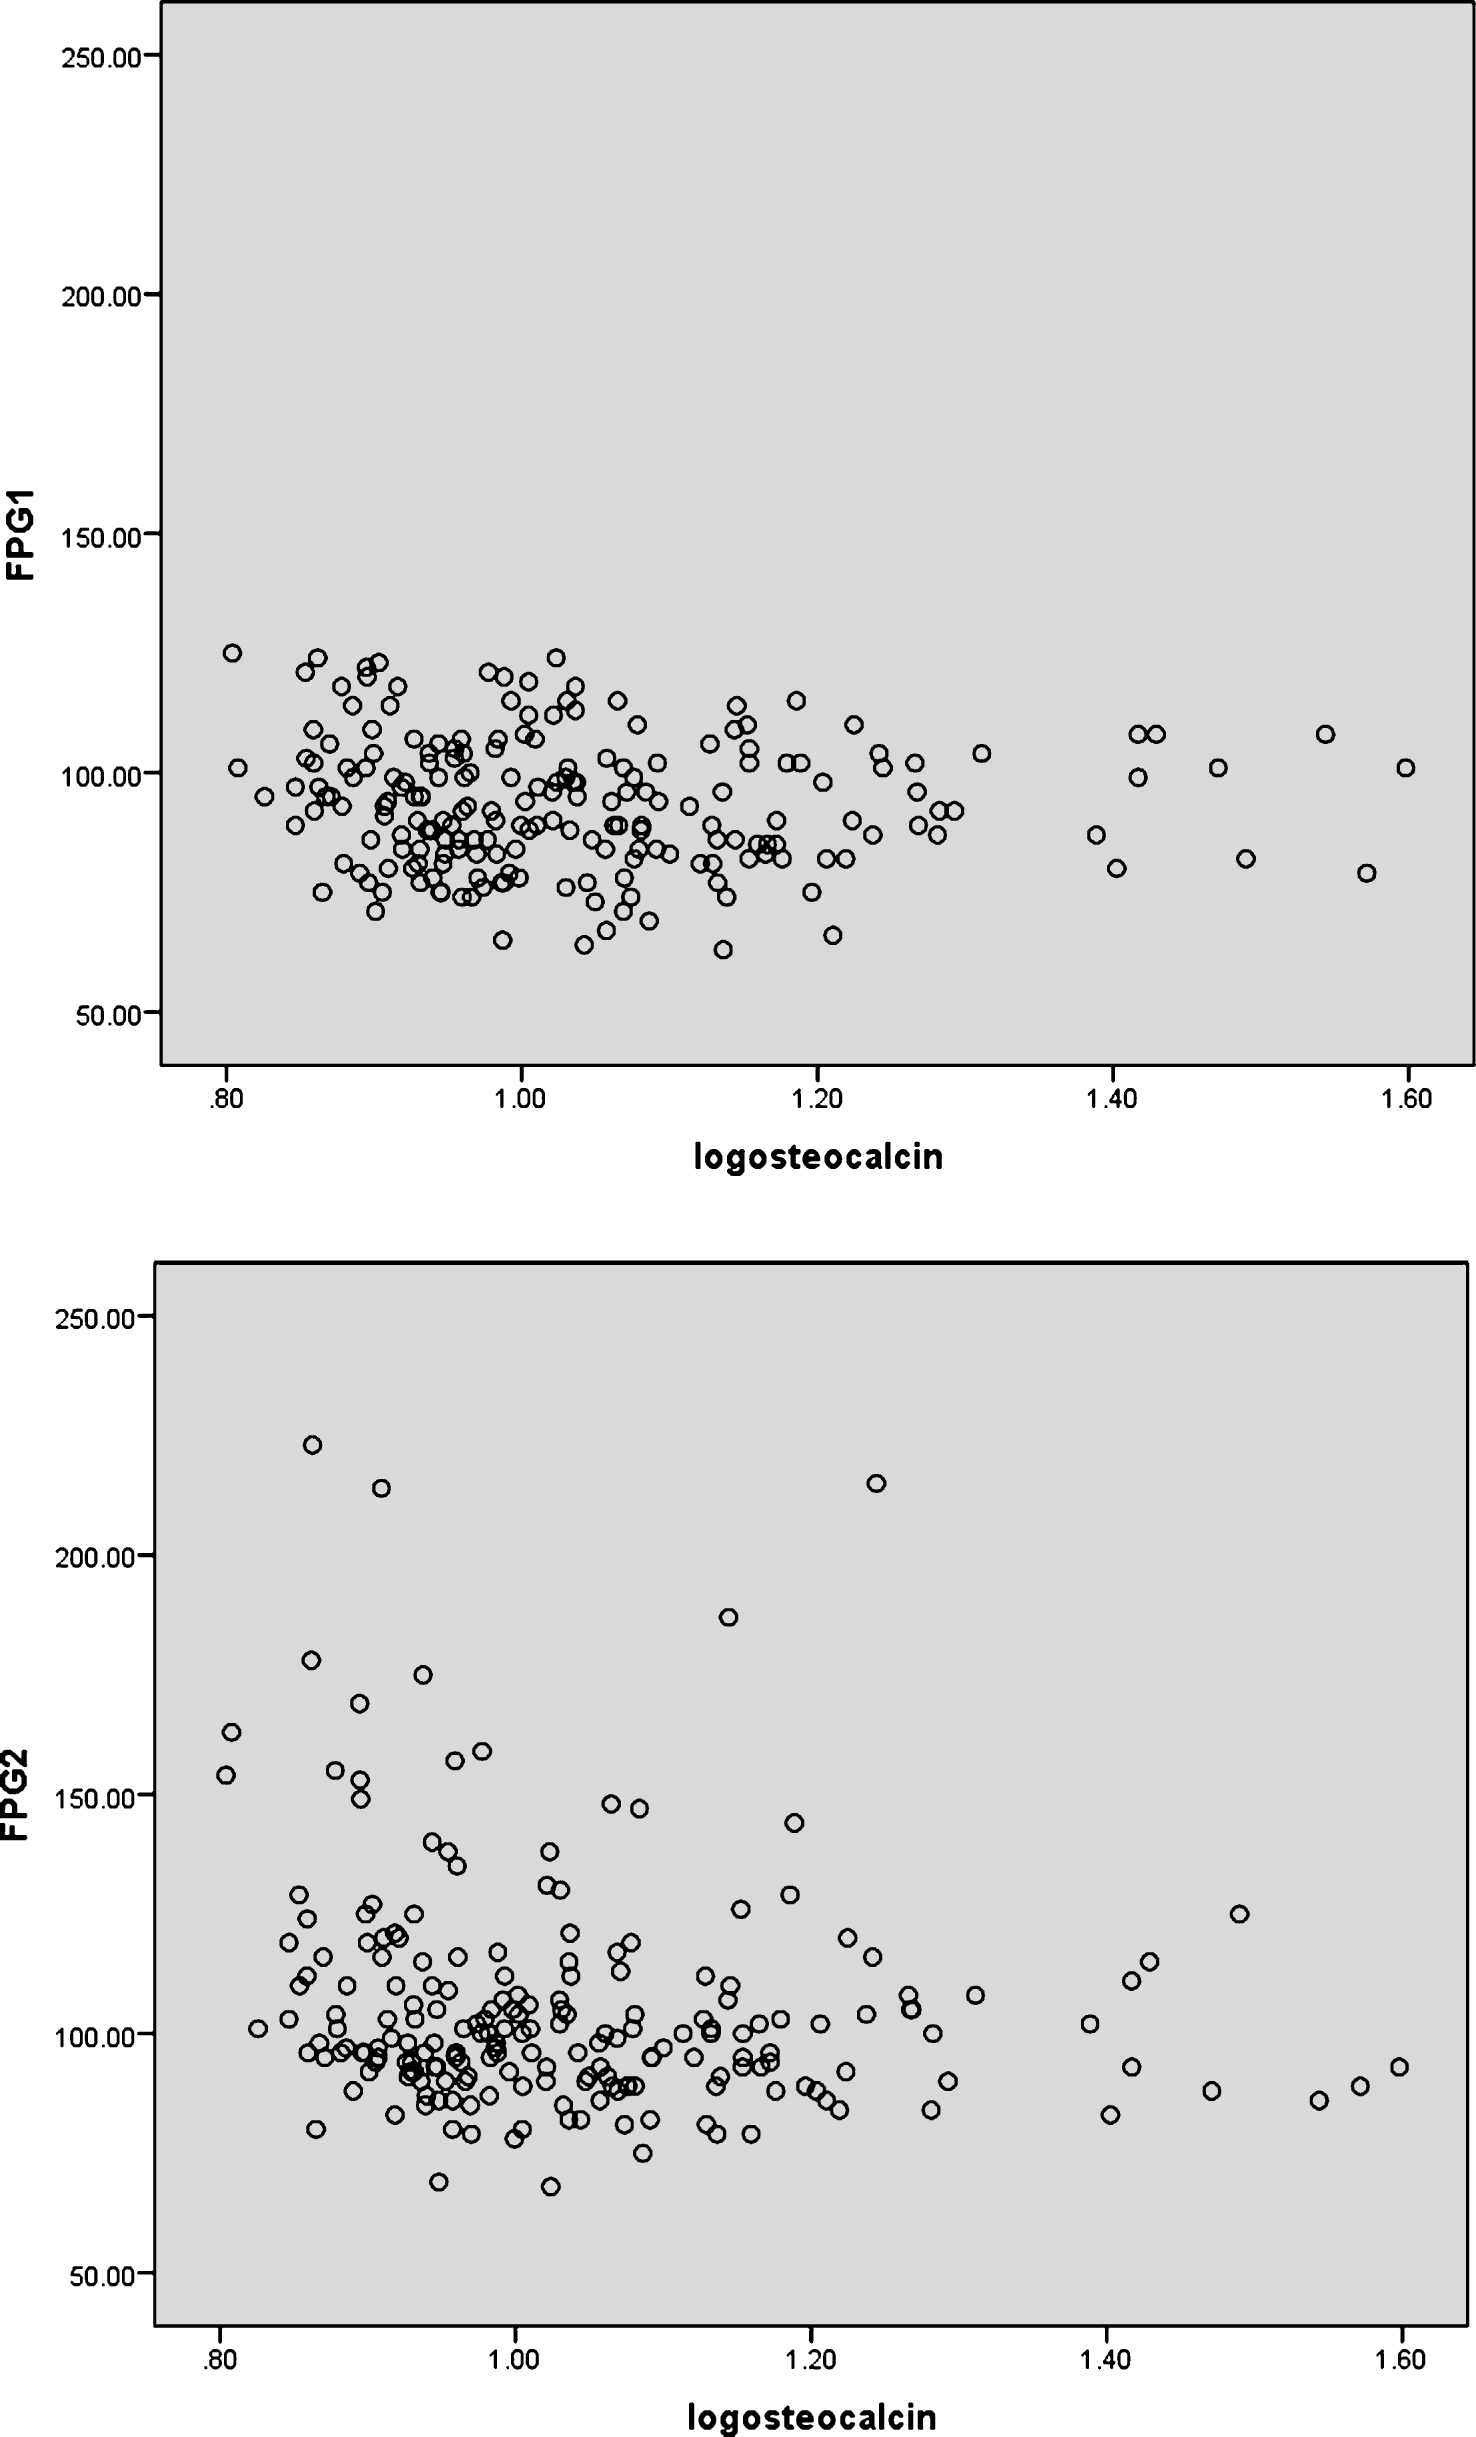 Scattered platform was used to show the correlation between logarithm of osteocalcin (ng/ml) and FPG (mg/dl) in postmenopausaul women with FPG <126 mg/dl at the beginning of the study (FPG1) and after the 5 year follow-up period (FPG2). OC had no significant correlation with FPG1 (r = –0.039 and P-value = 0.288), but had negative correlation with FPG2 (r = –0.134 and P-value = 0.028). FPG, Fasting Plasma Glucose; OC, osteocalcin.